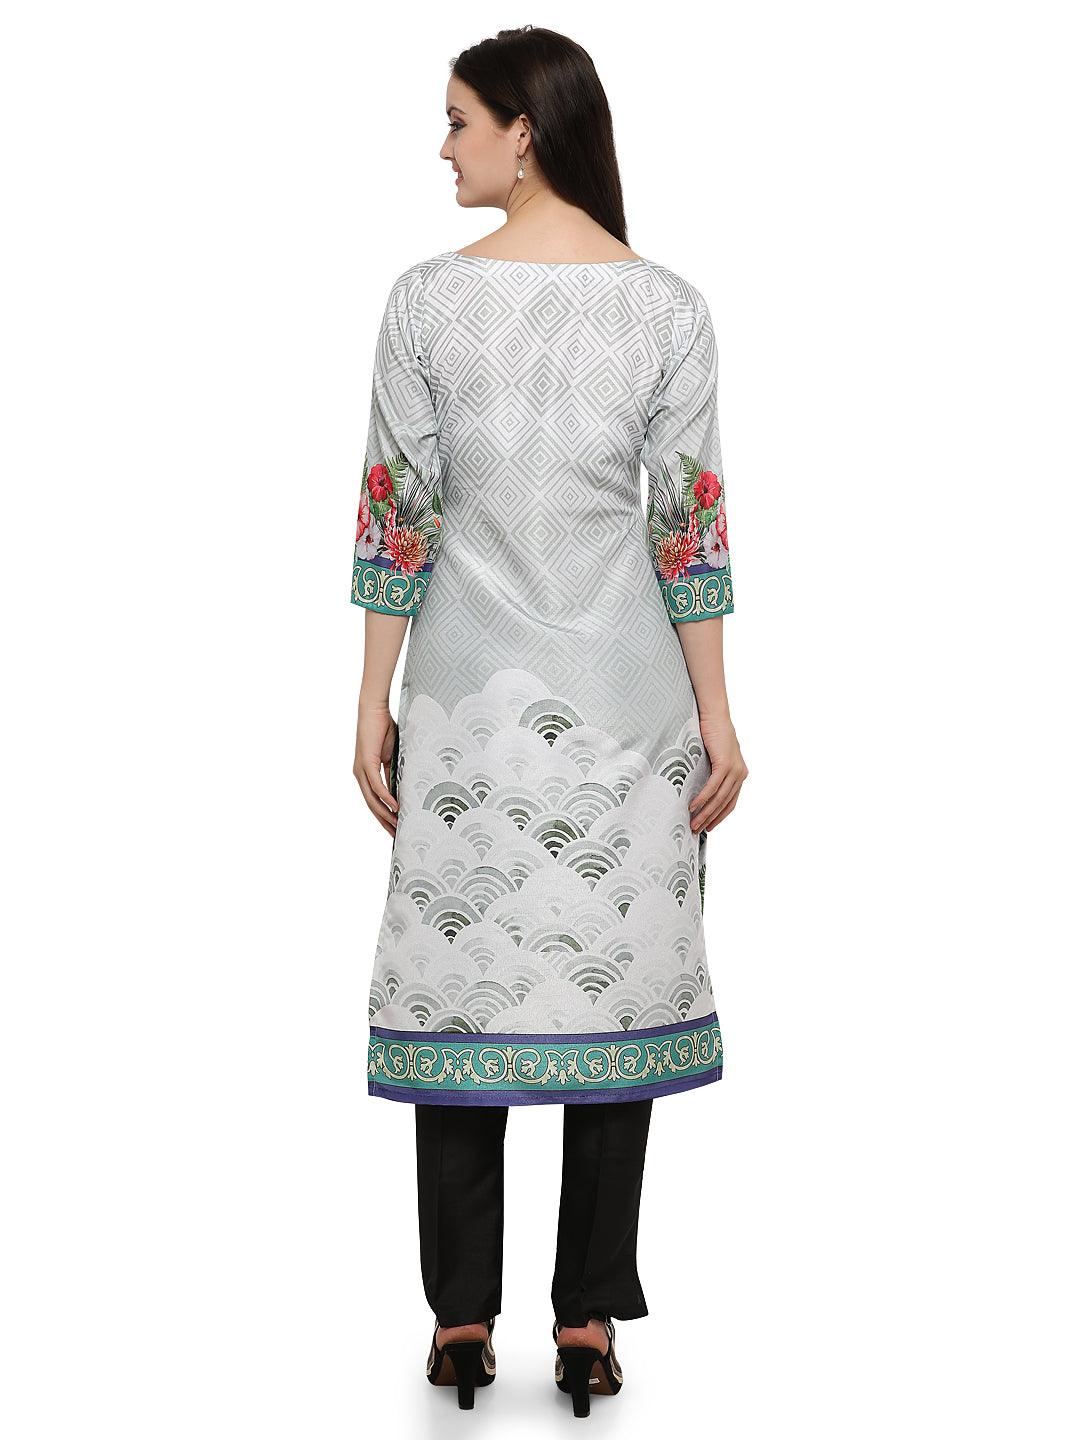 Women's Middle Eastern Theme Printed Faux Silk Only Kurta - AHALYAA - Indiakreations